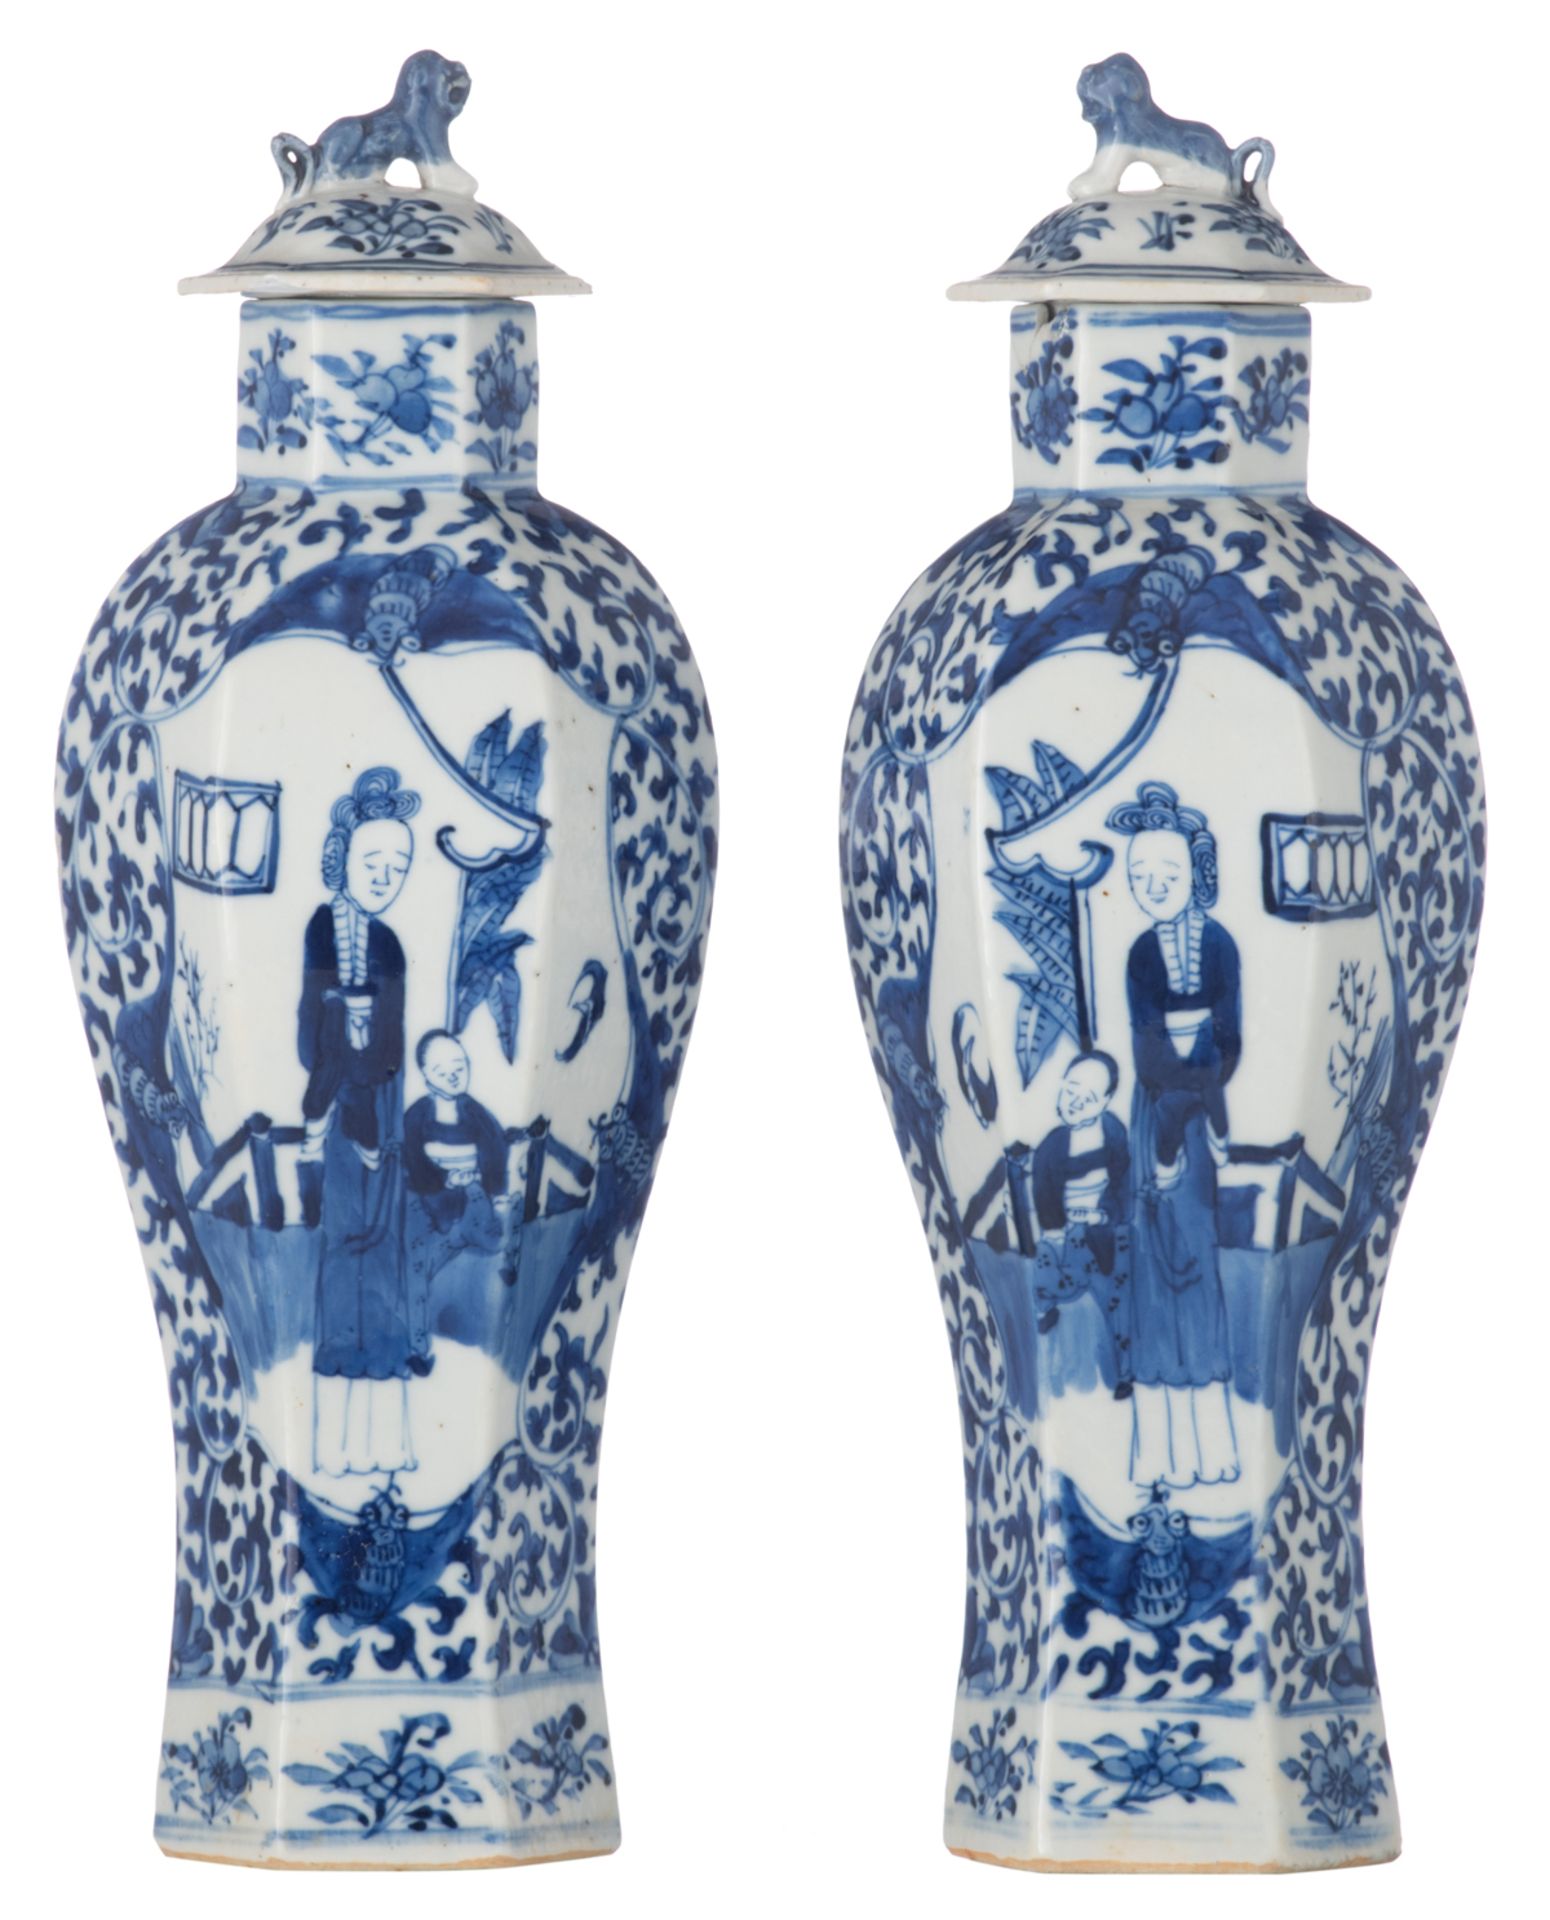 A pair of Chinese hexagonal porcelain vases and covers, blue and white decorated with figures in a p